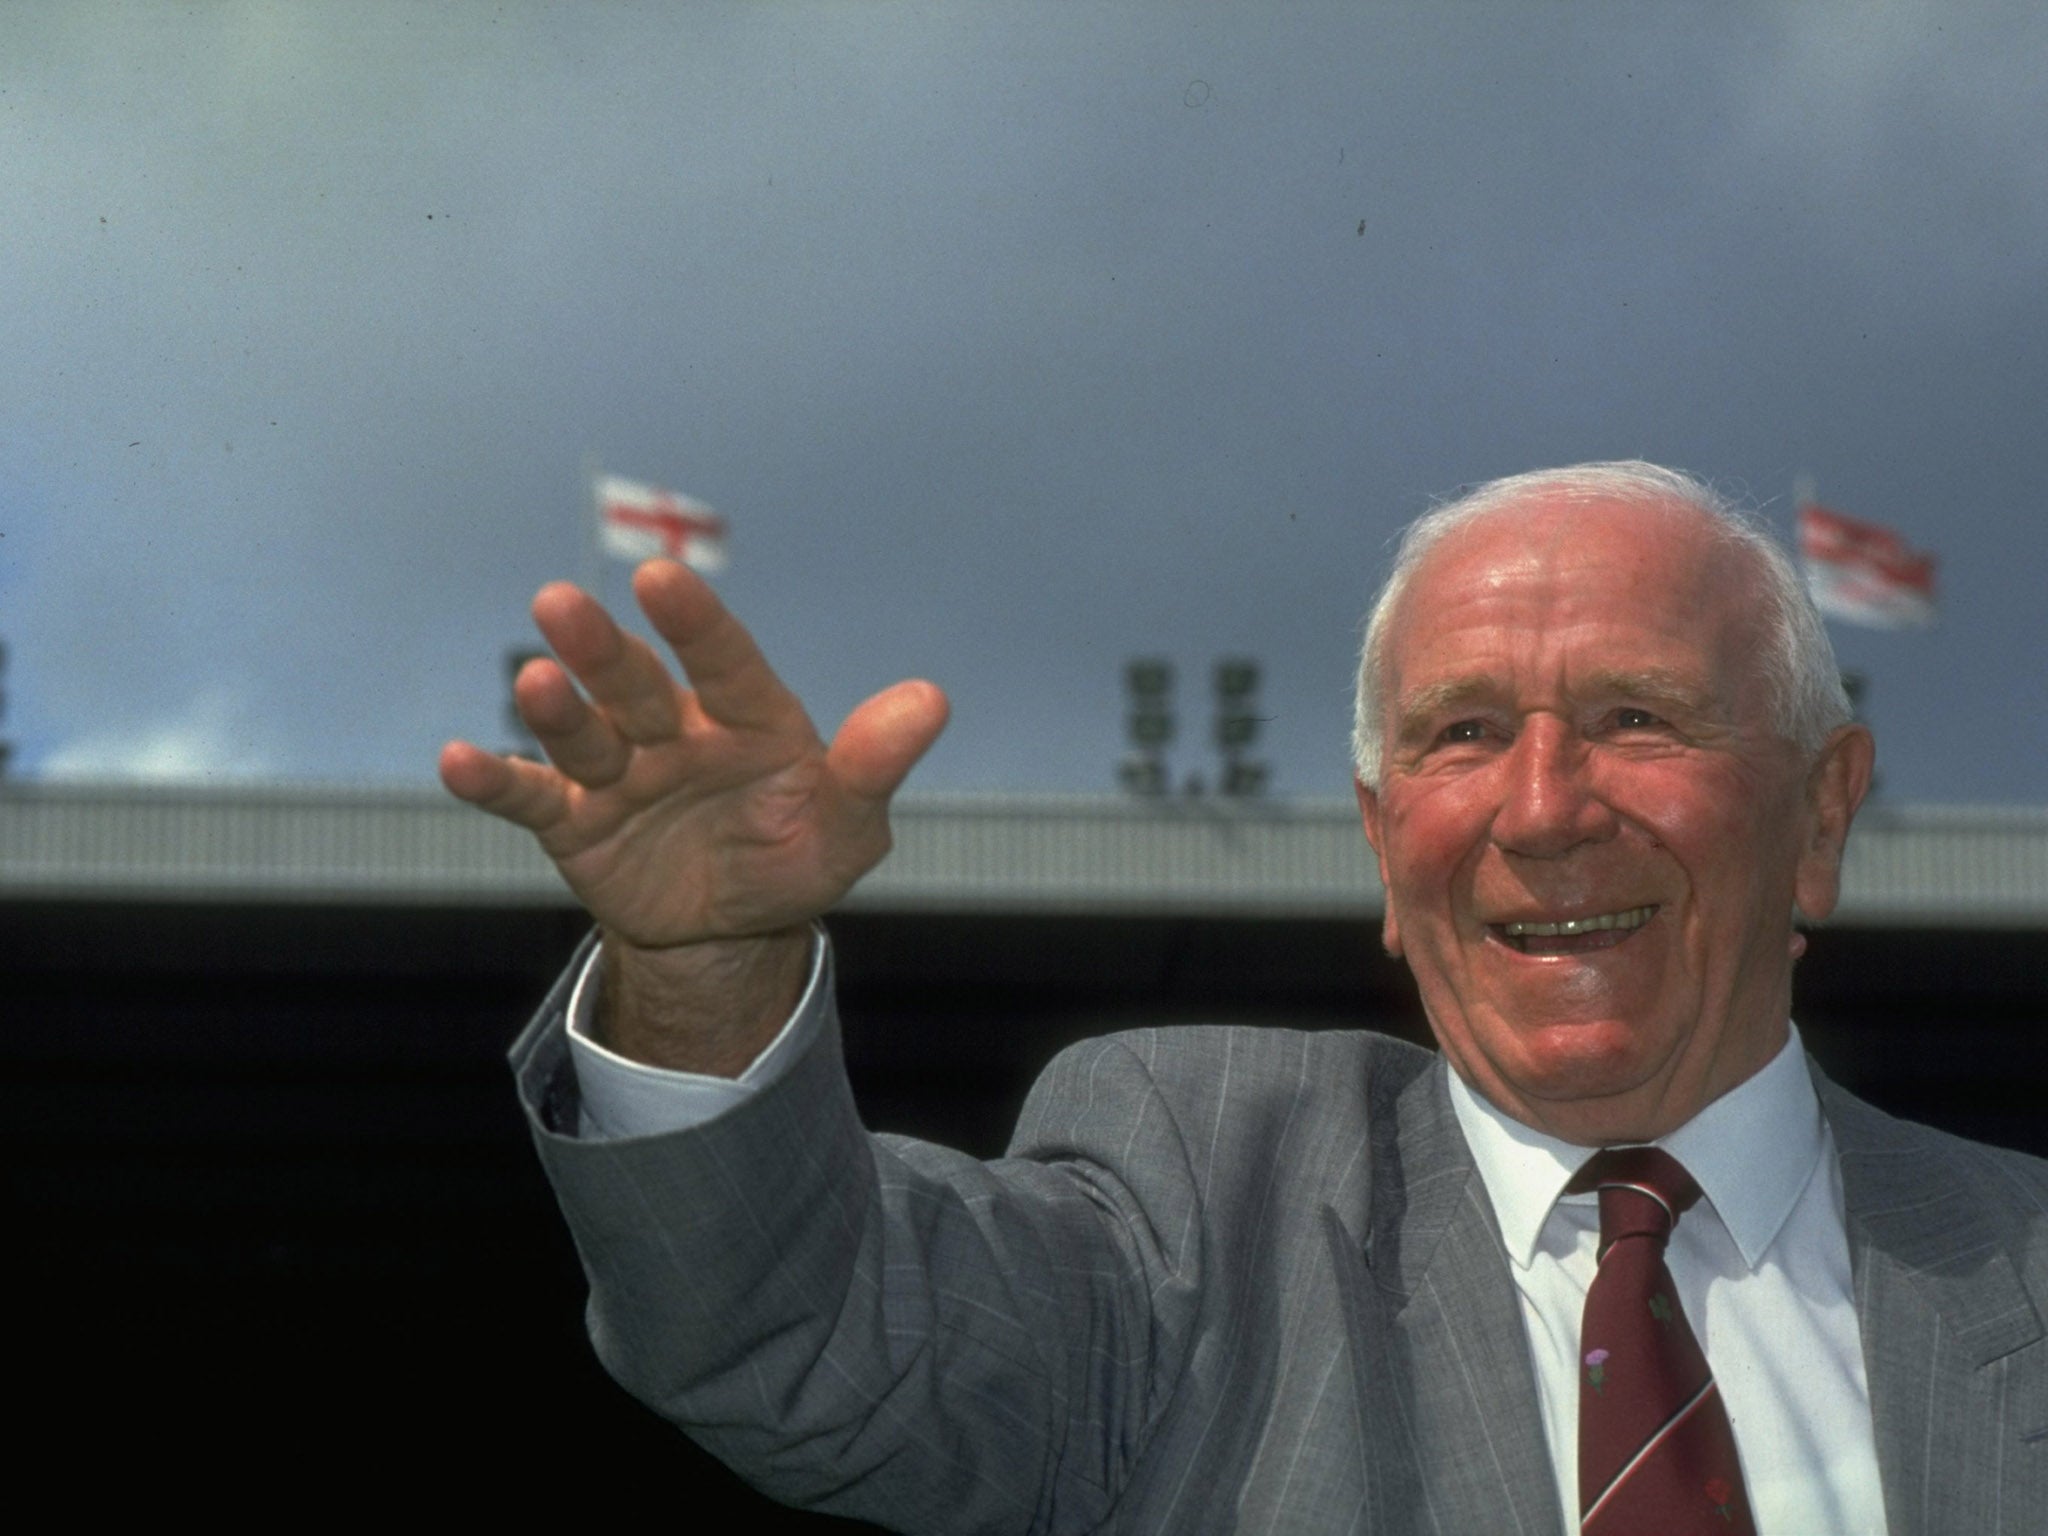 A new plaque bearing Sir Matt Busby's name will replace the old one on his Old Trafford seat